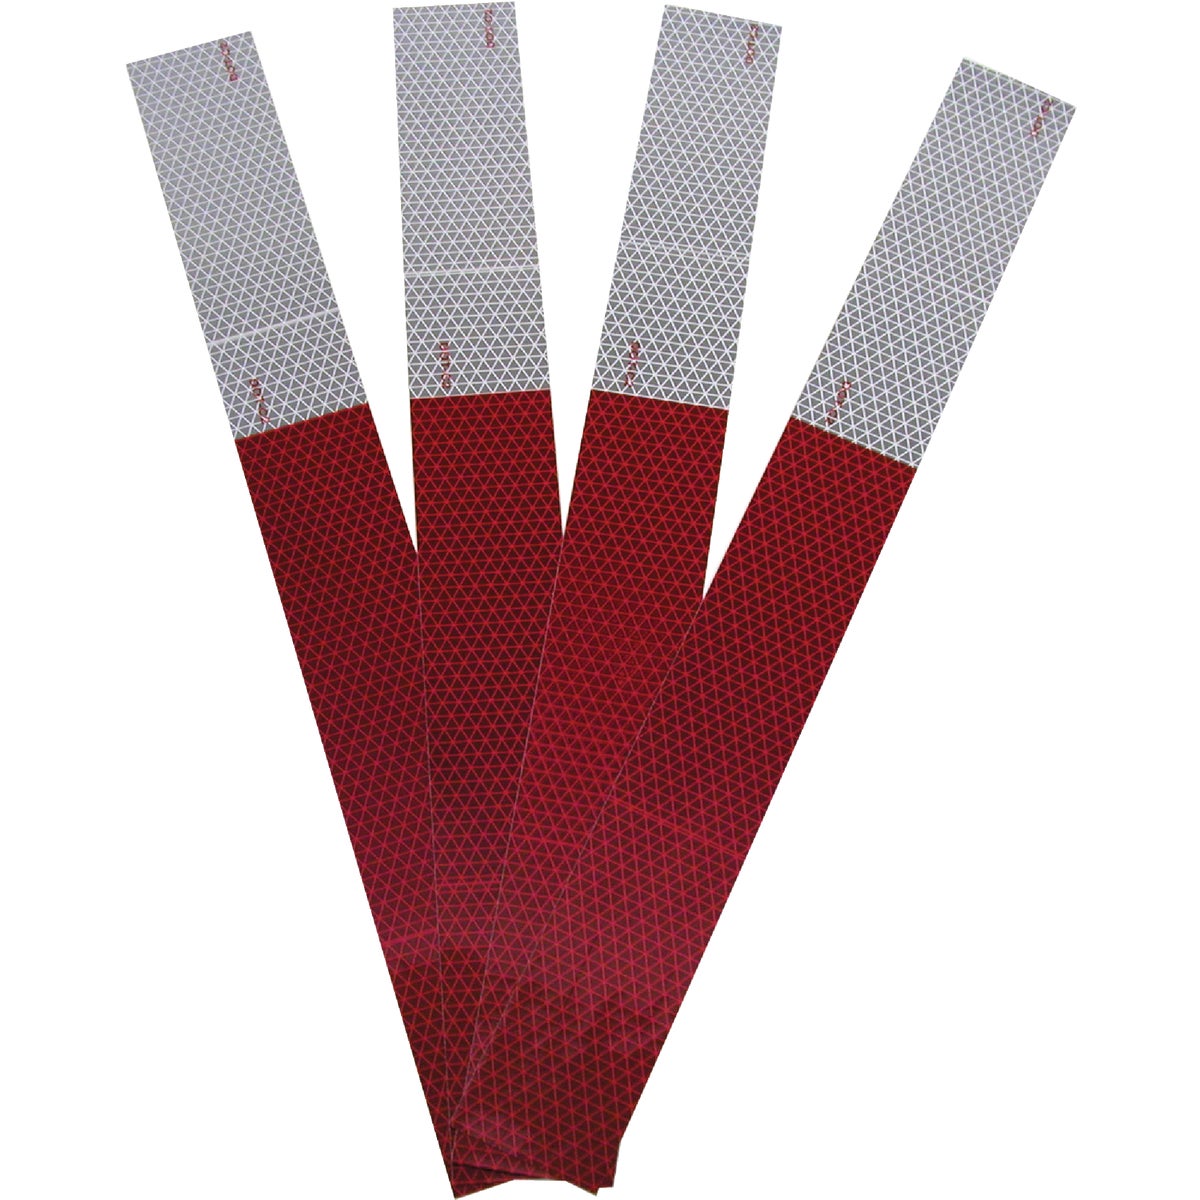 Item 579207, The Red Reflective Strips provide greater reflectivity and higher 